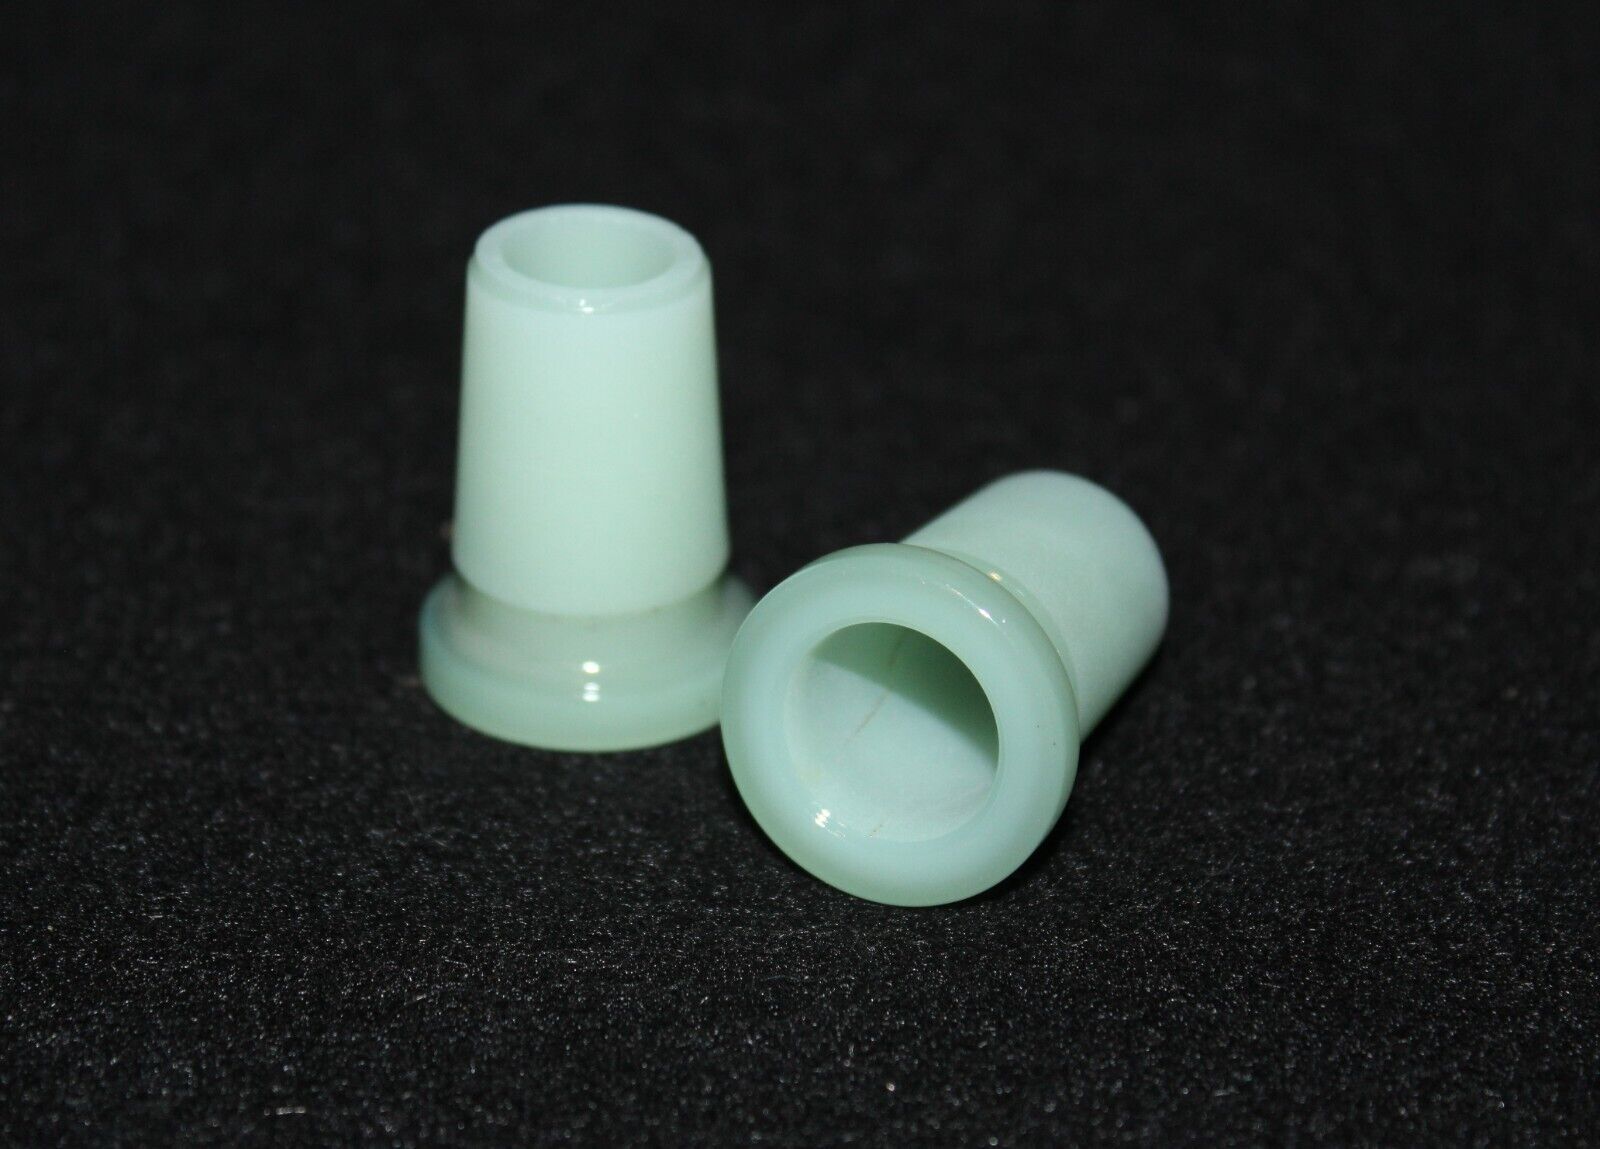 GREEN COMPACT 18mm to 14mm Slide BOWL ADAPTER Tobacco Smoking Bowl Adapter